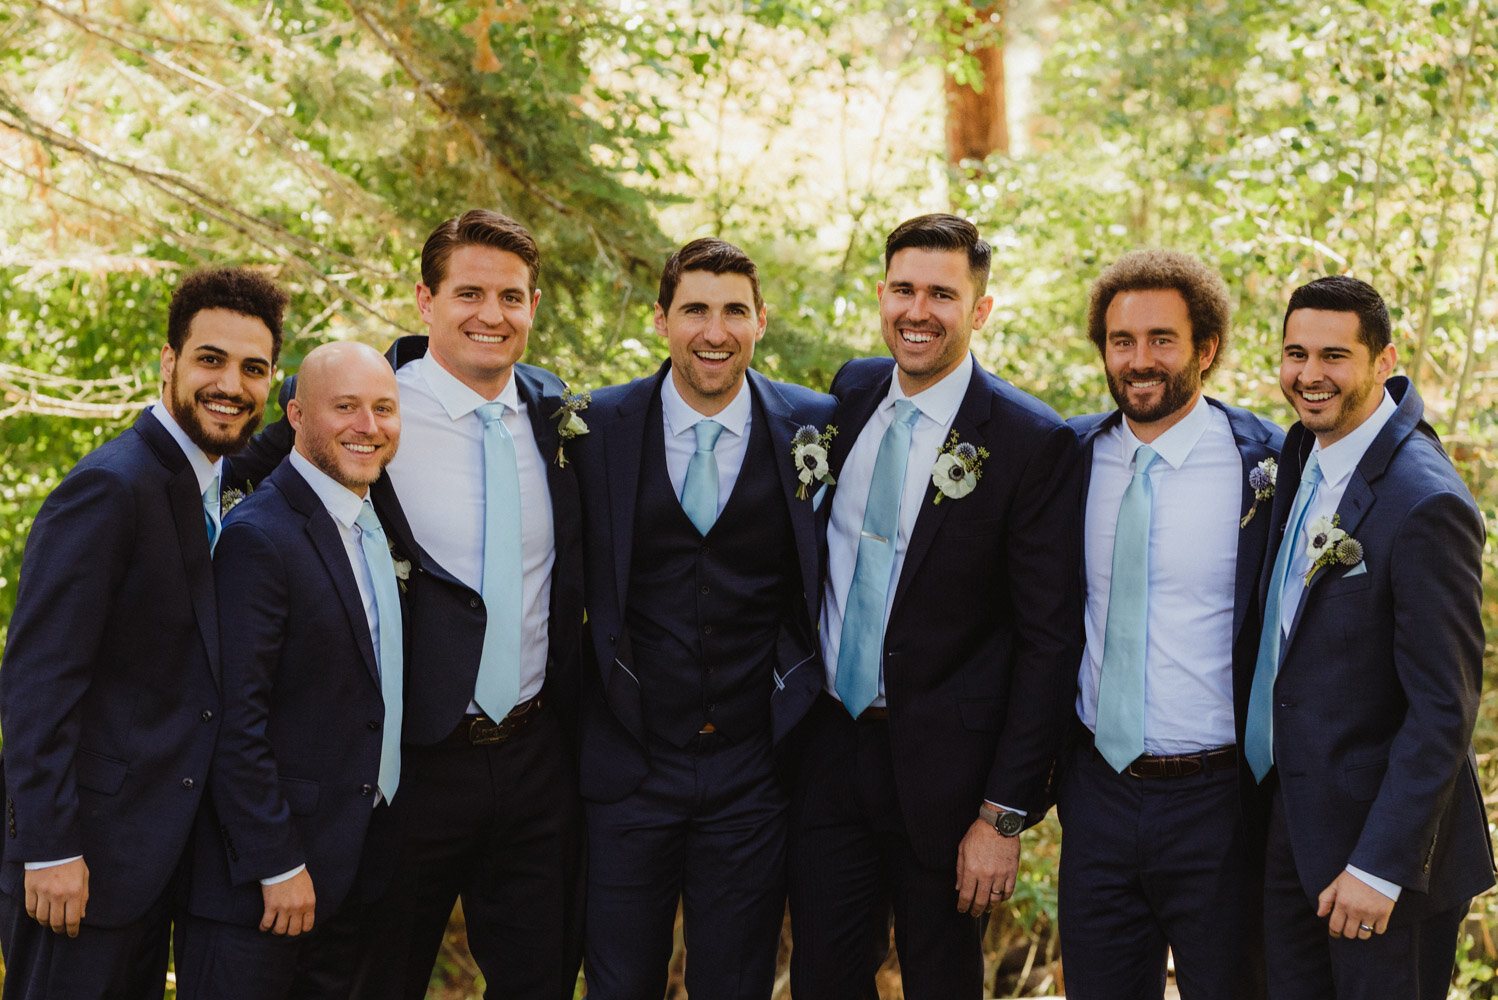 The Chateau Incline Village Wedding, groom and his friends photo